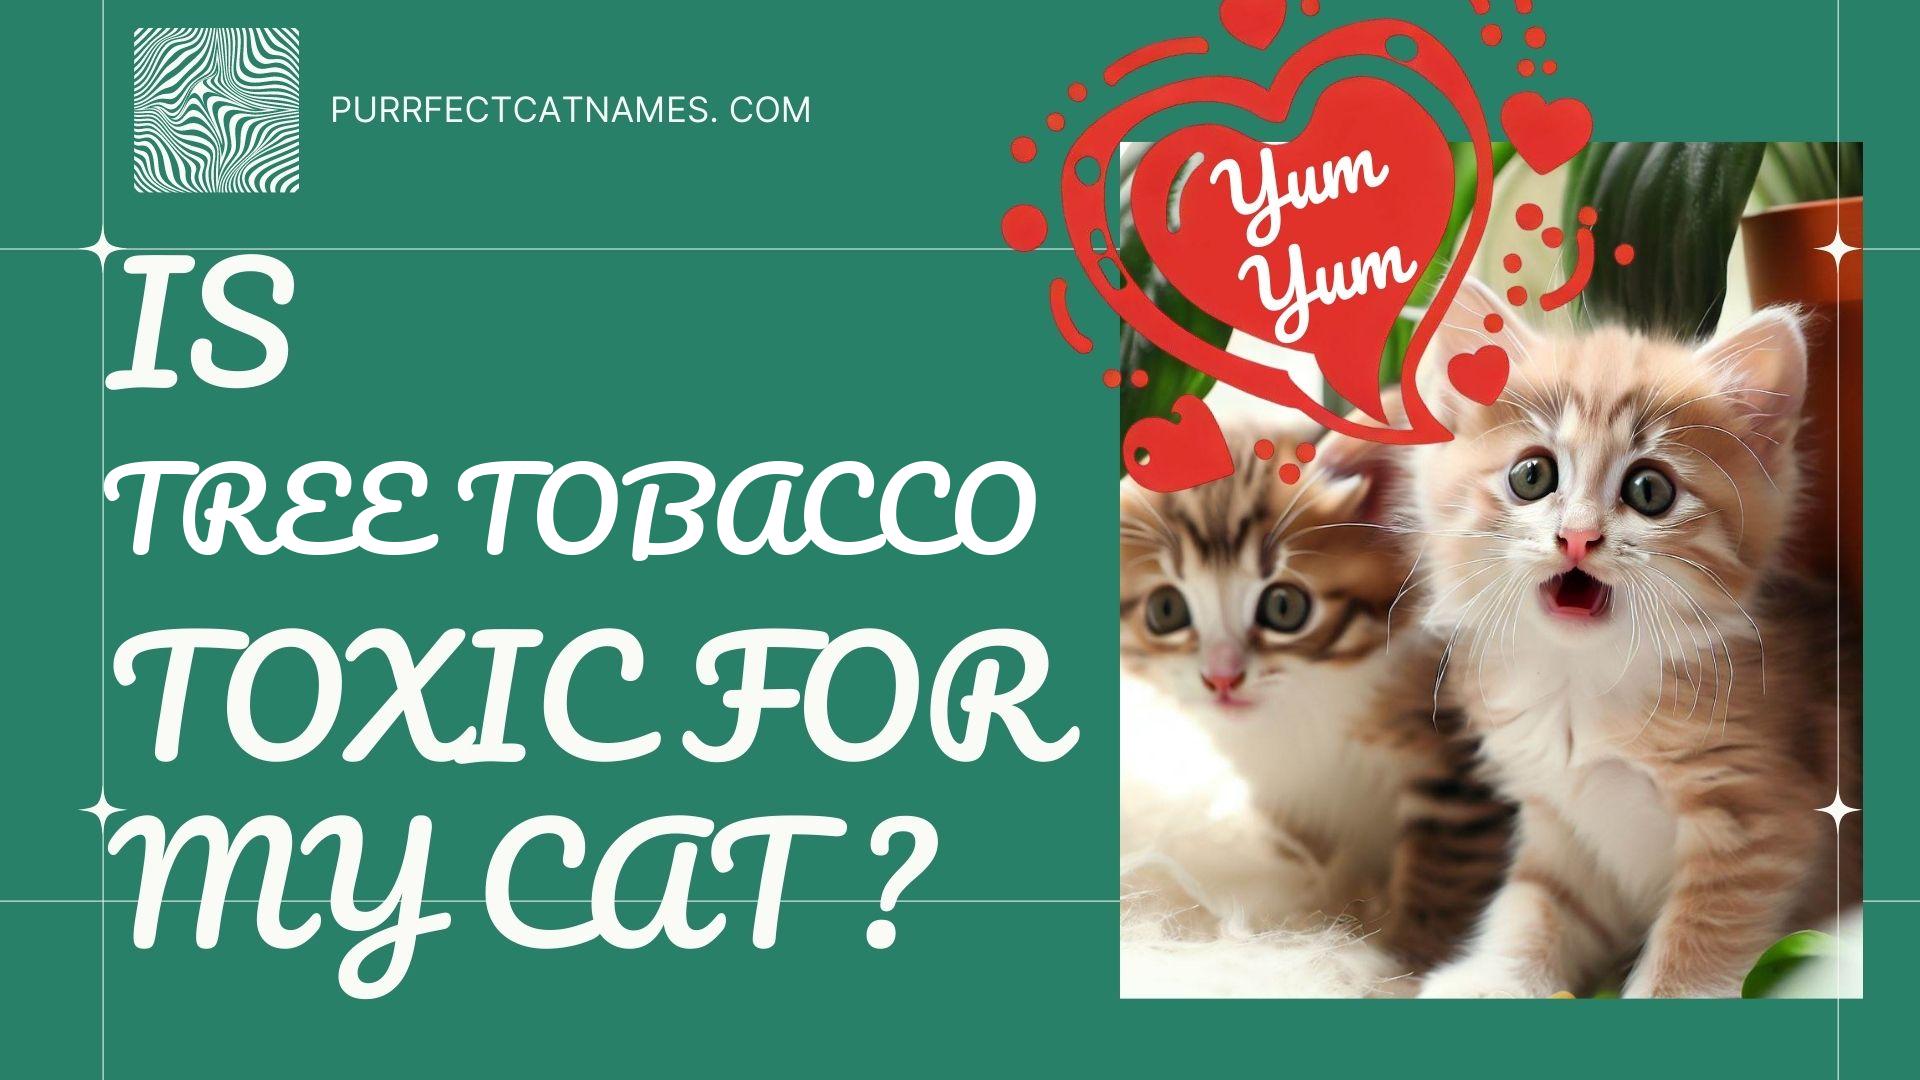 IsTree Tobacco plant toxic for your cat